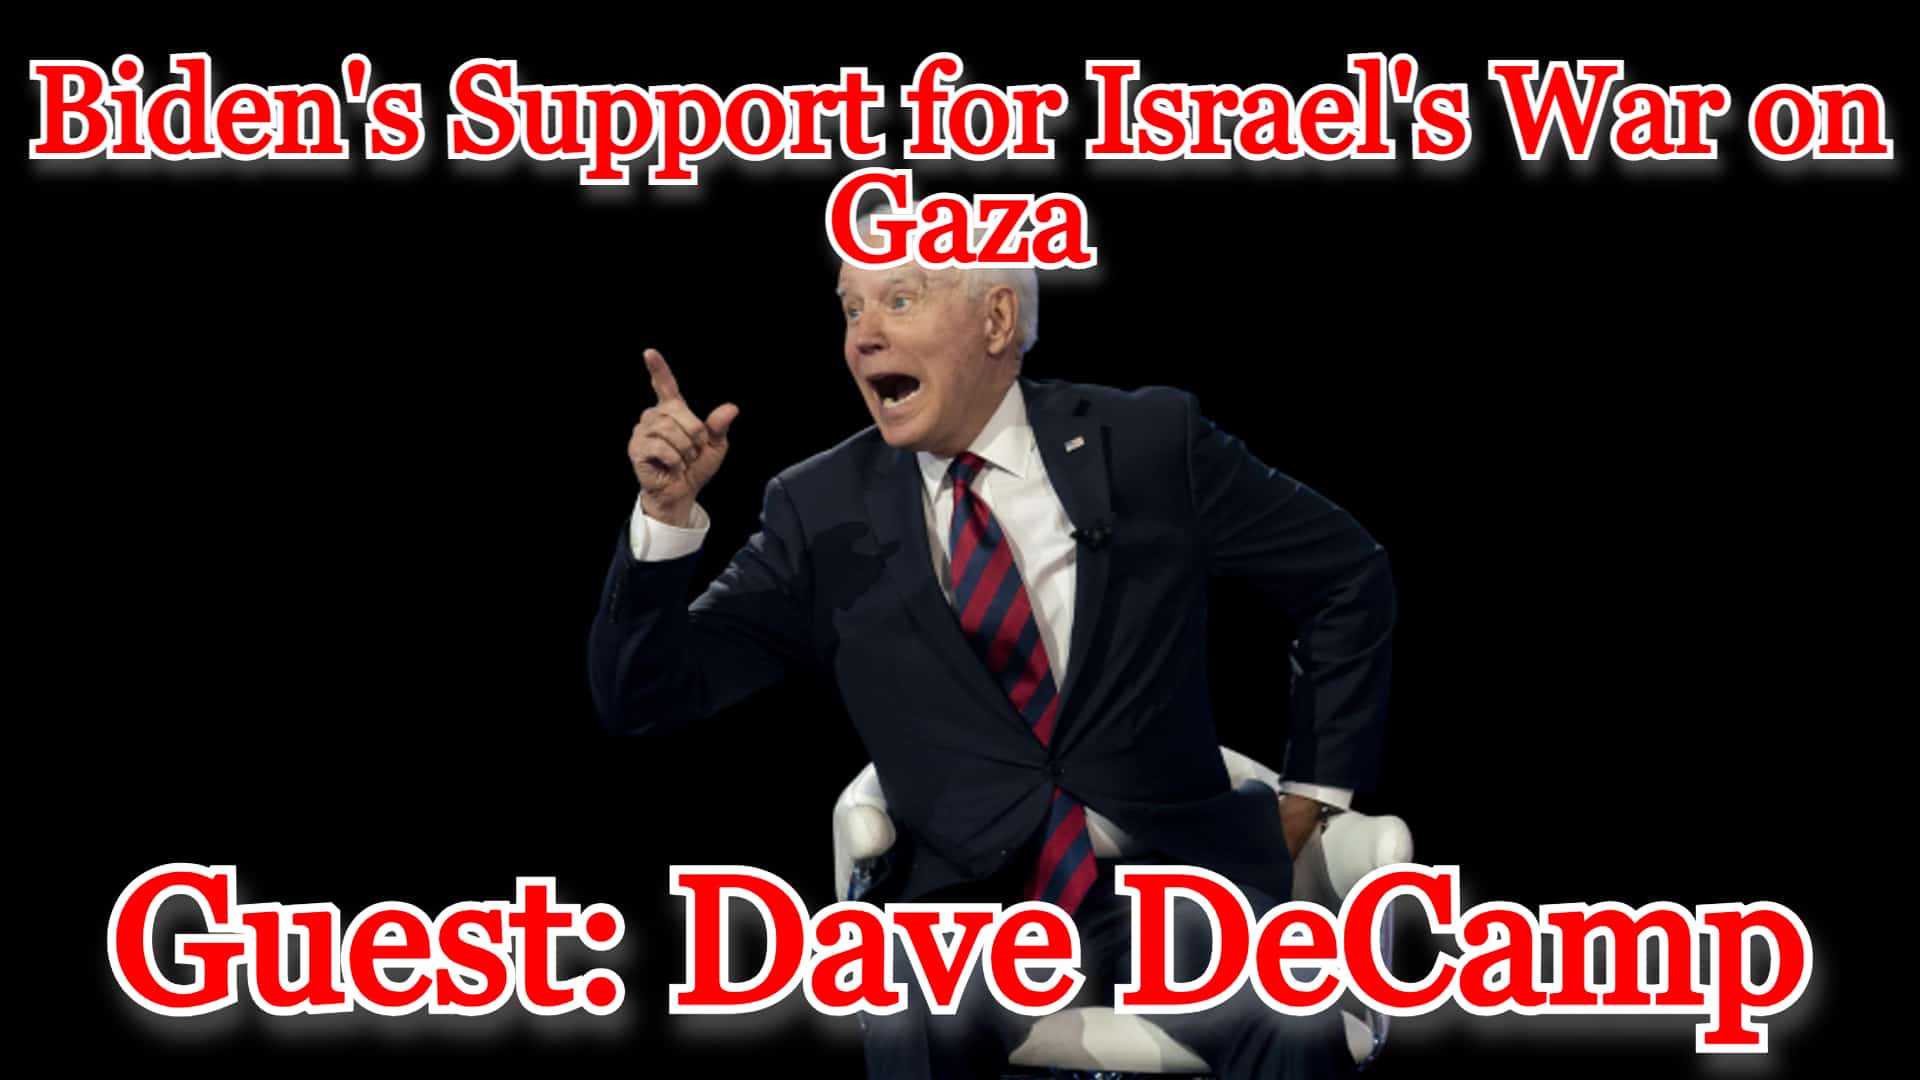 COI #491: Dave DeCamp on Biden’s Support for Israel’s War on Gaza